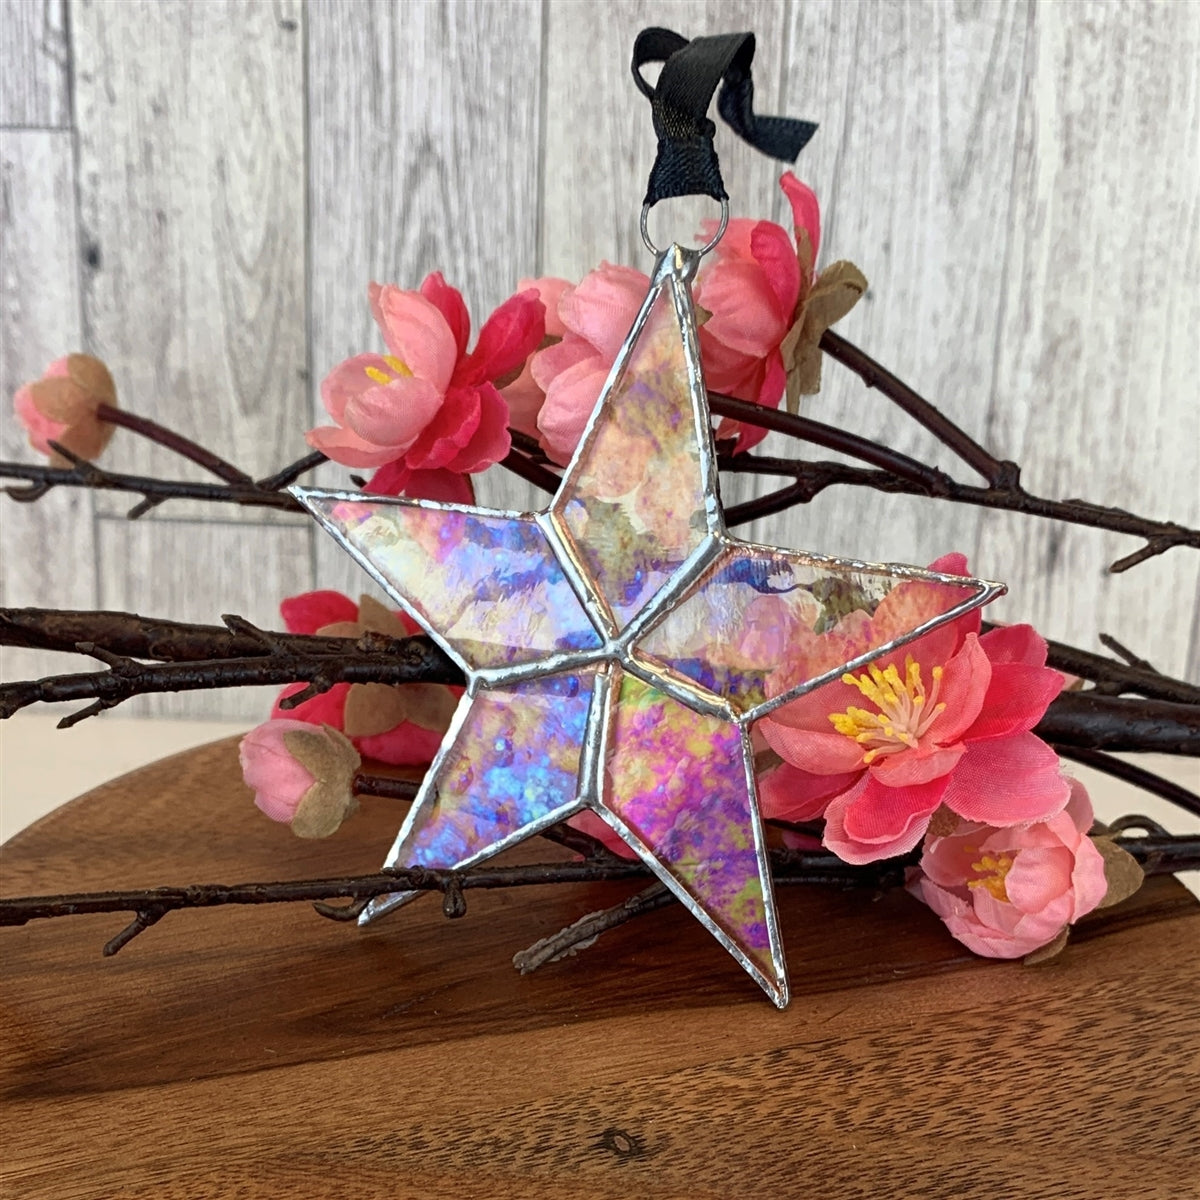 Christian God Shines: Be Well Stained Glass Star